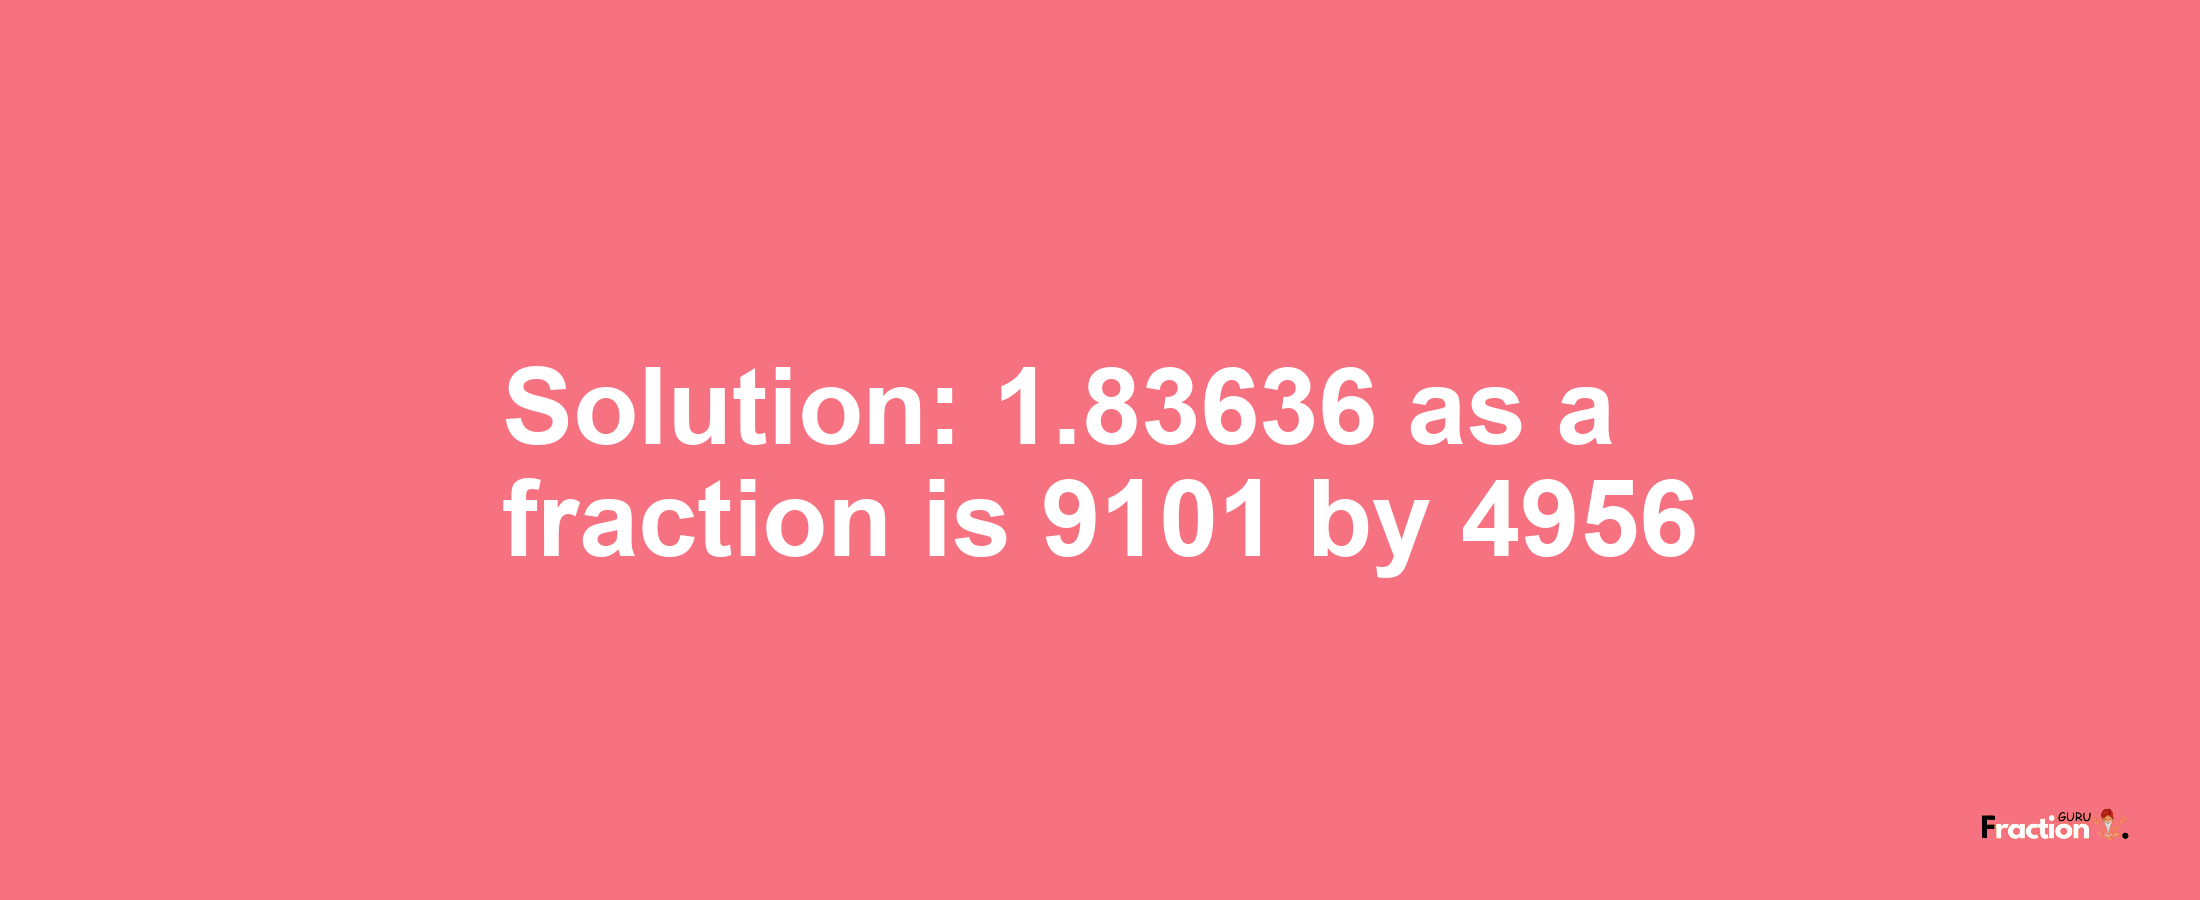 Solution:1.83636 as a fraction is 9101/4956